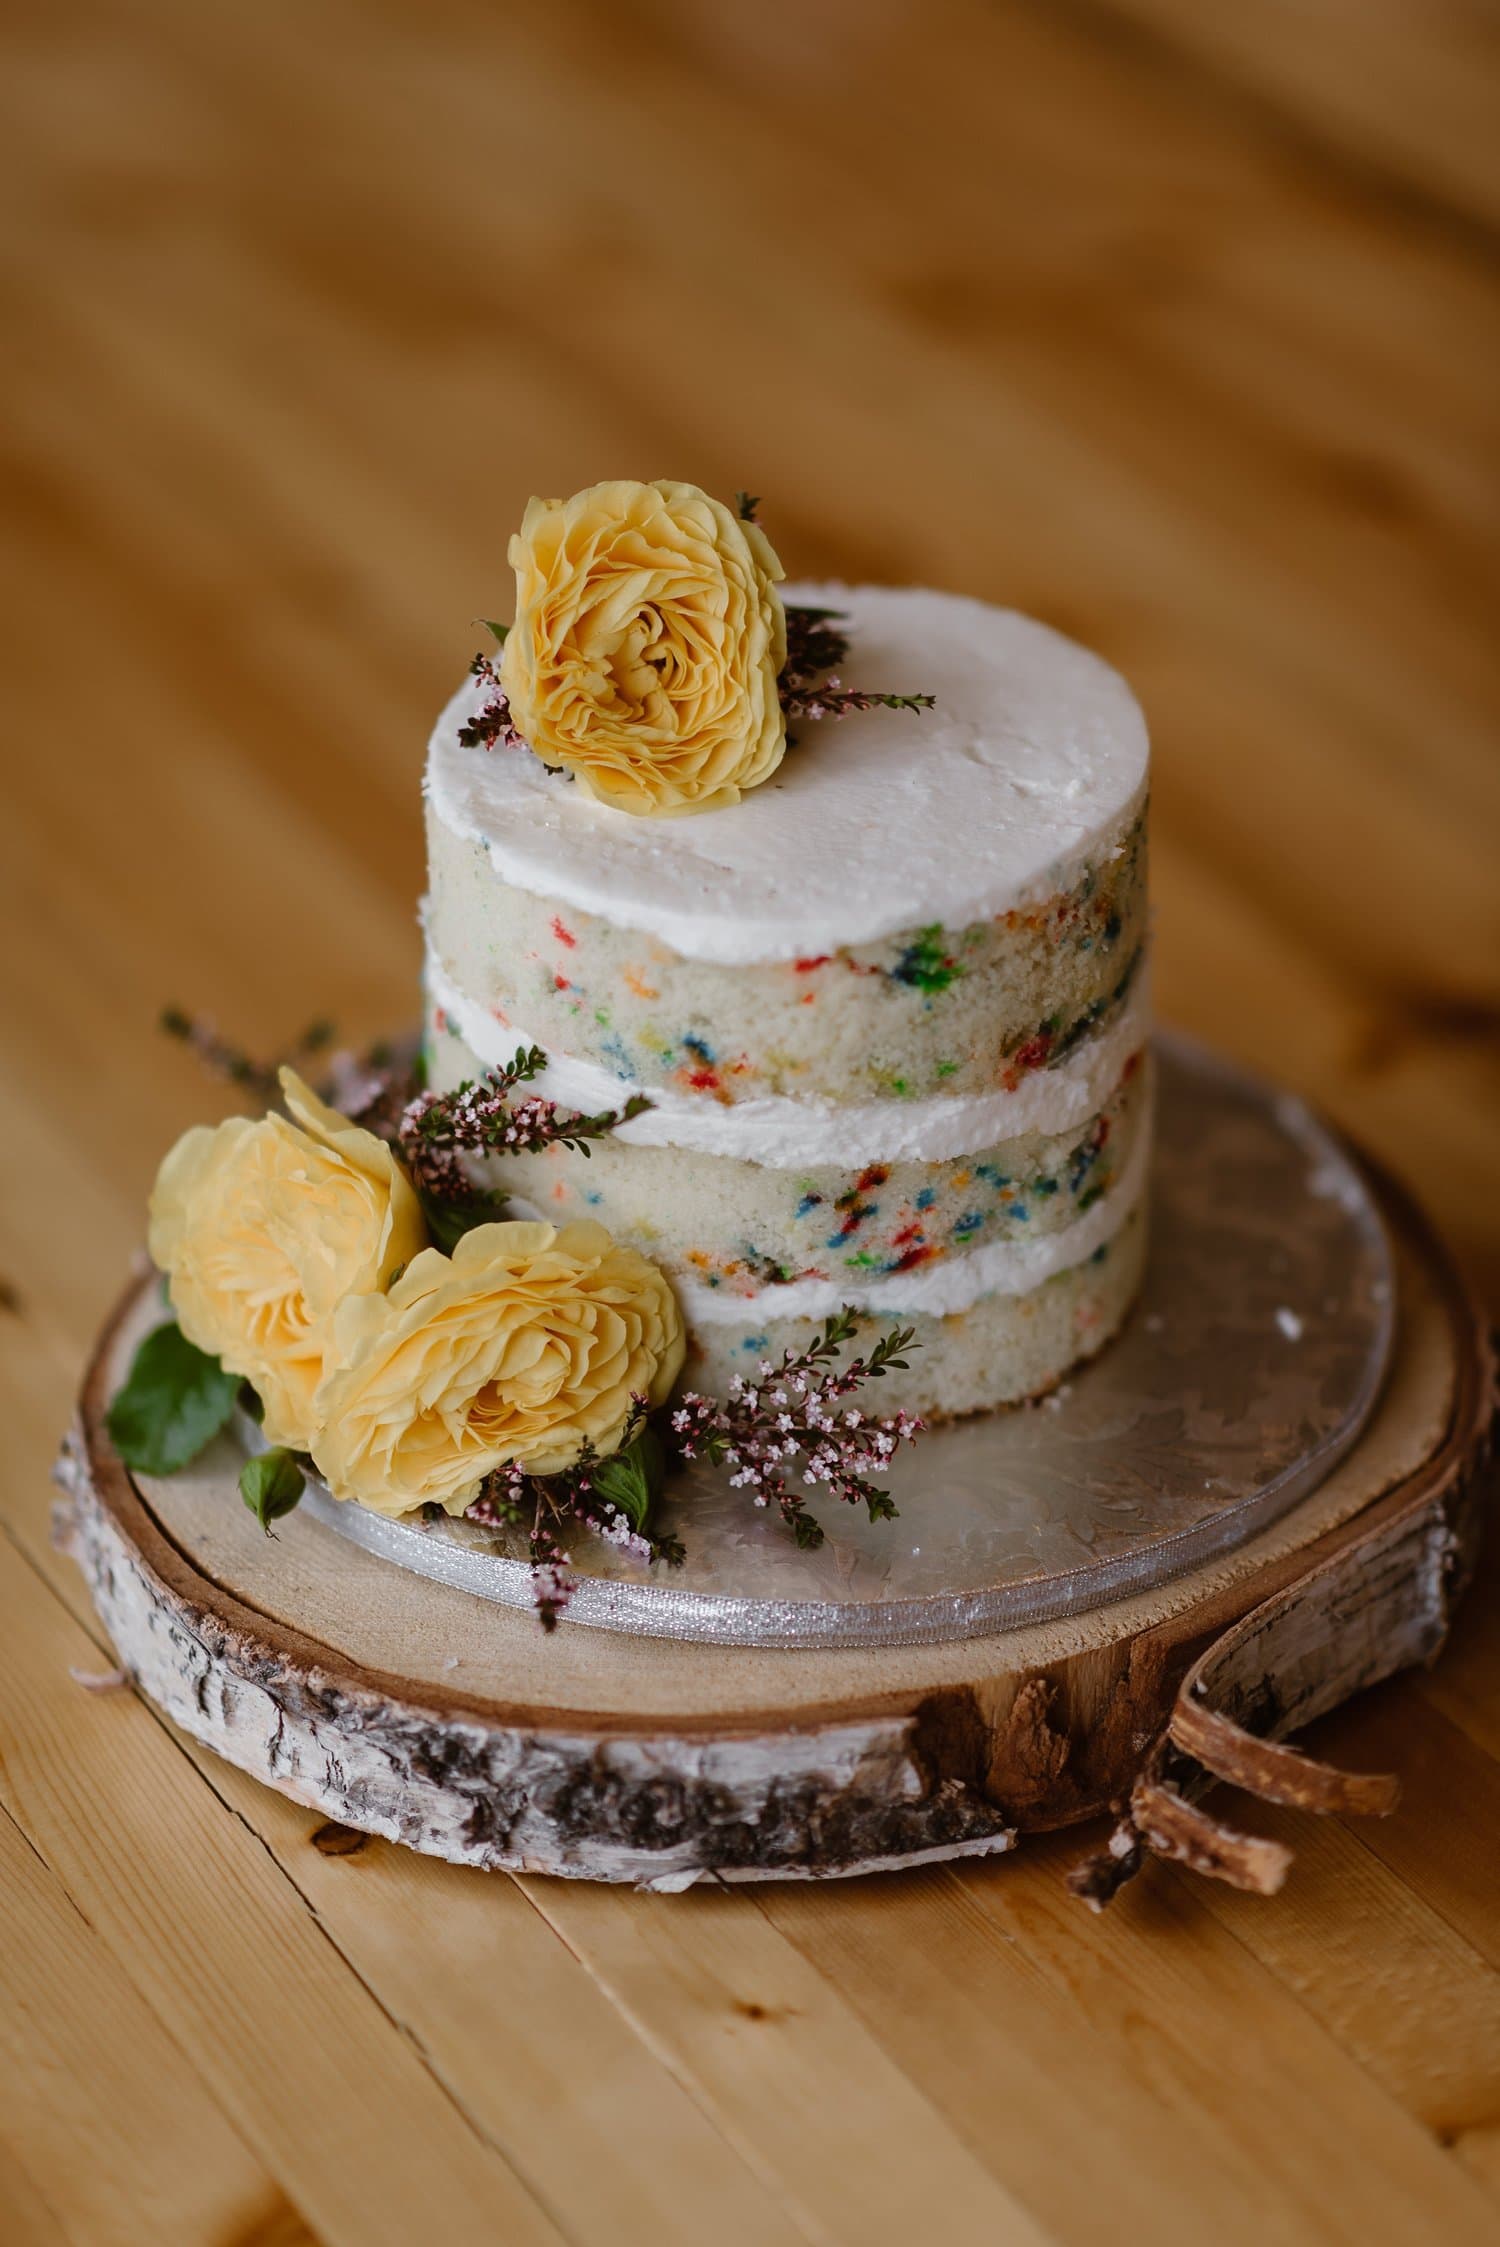 Confetti cake, with white frosting, on a tree stump platter. There are yellow roses next to the cake. 